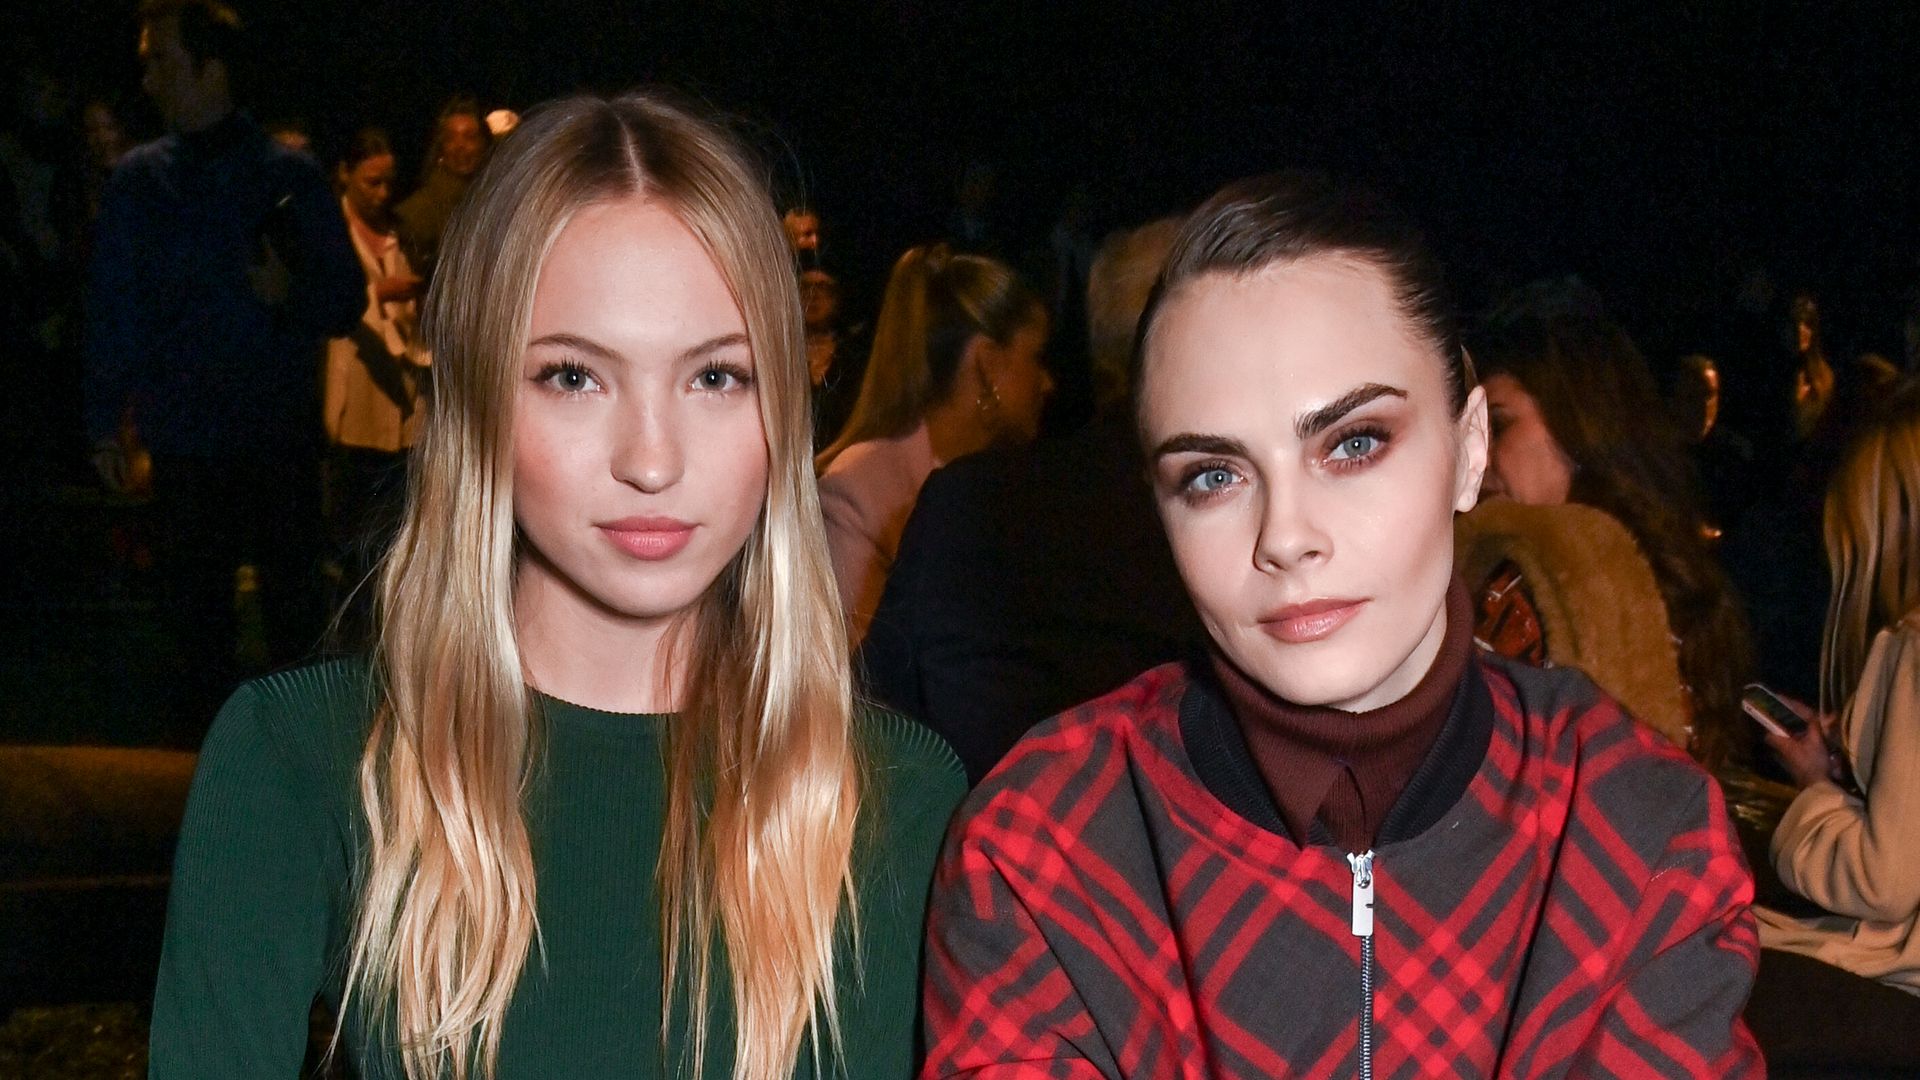 LONDON, ENGLAND - FEBRUARY 19: Lila Moss and Cara Delevingne attend the Burberry Winter 2024 show during London Fashion Week on February 19, 2024 in London, England. (Photo by Dave Benett/Getty Images for Burberry)